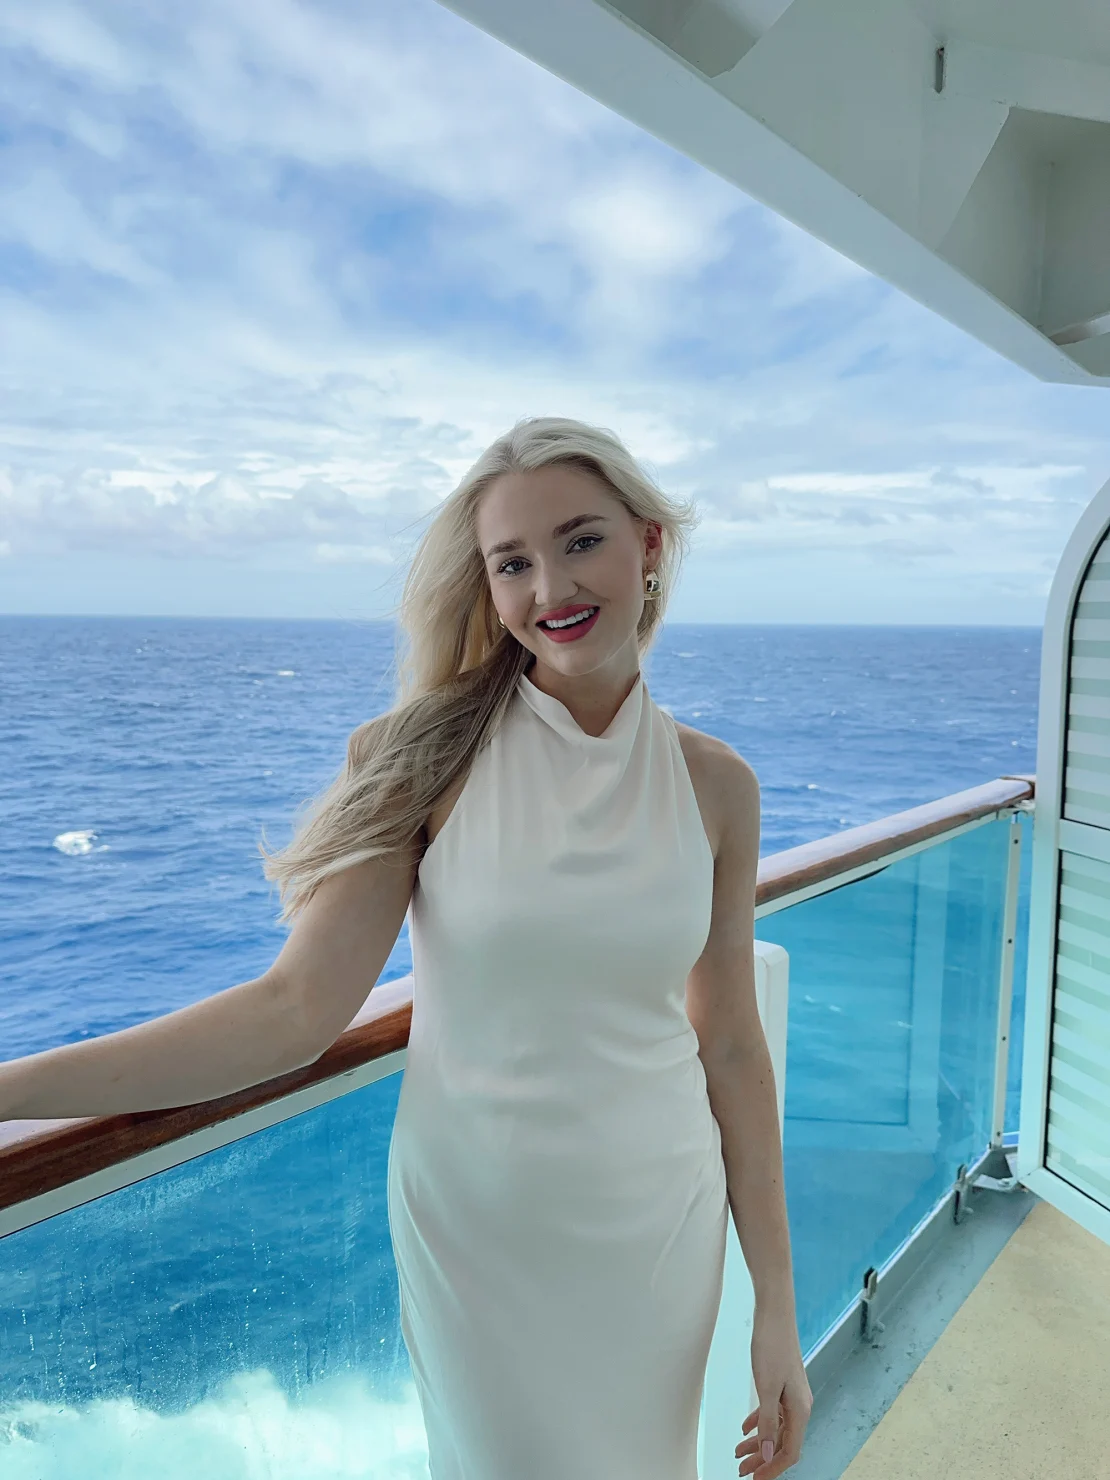 South African influencer Amike Oosthuizen is one of the passengers aboard Royal Caribbean’s Ultimate World Cruise.